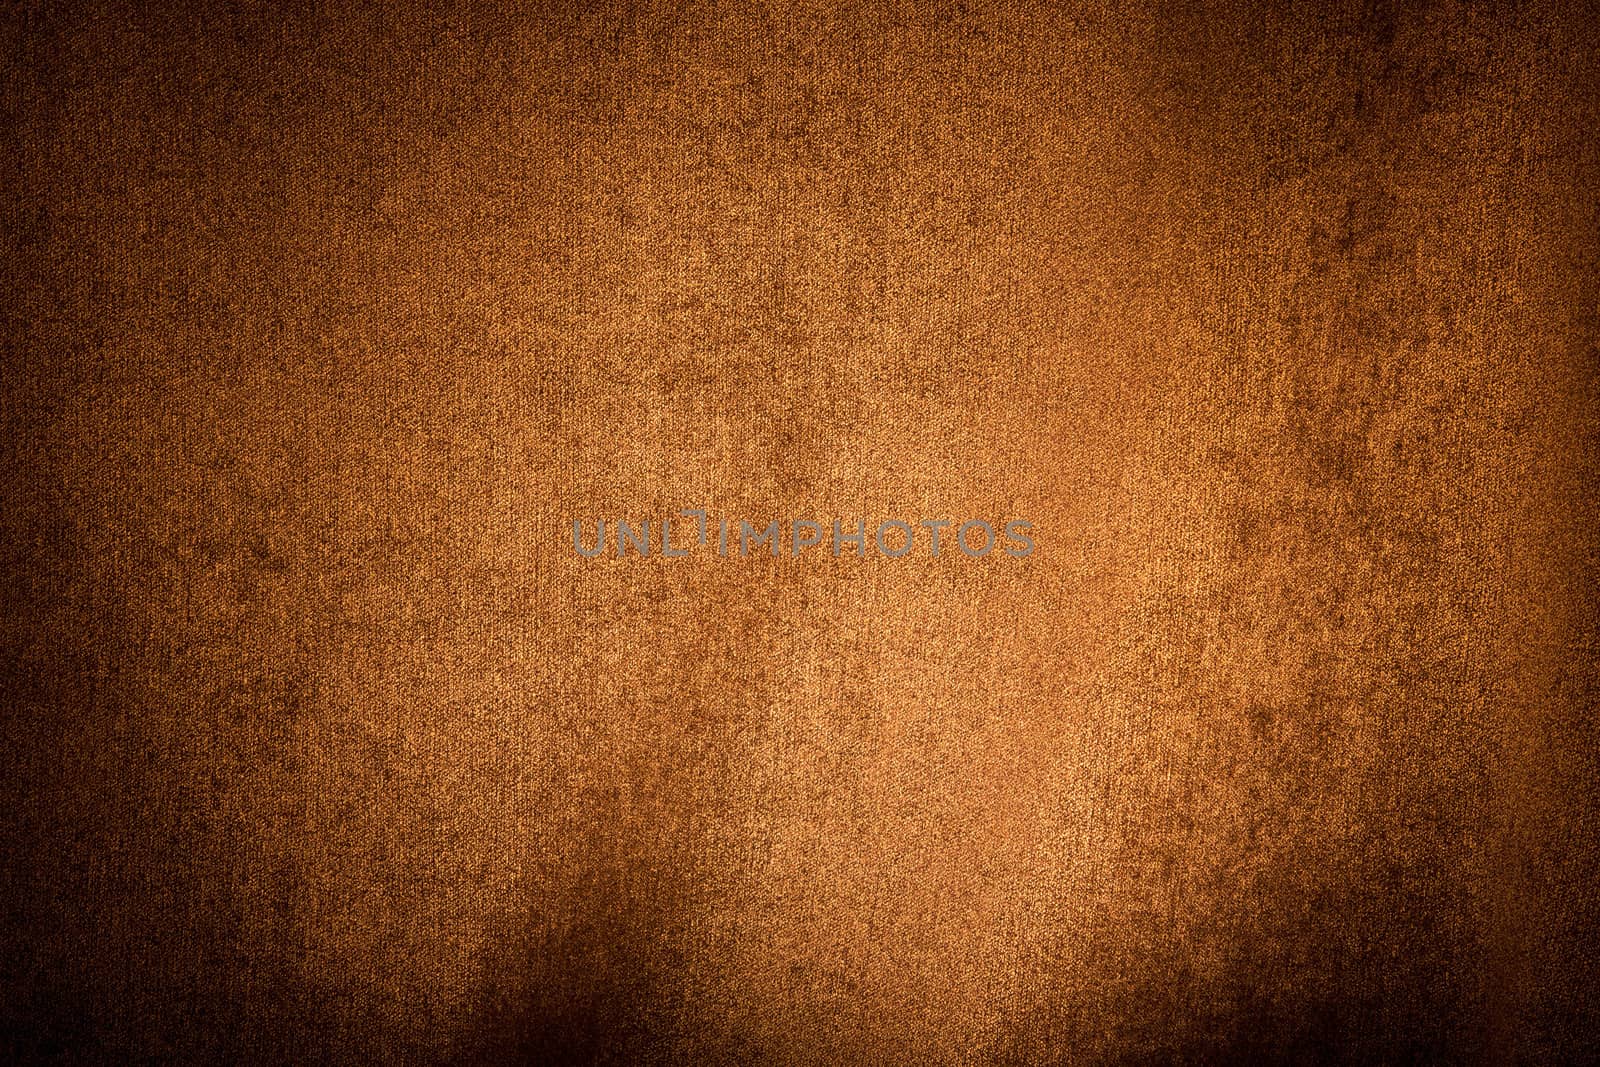 An orange and brown textured background with variations in light.